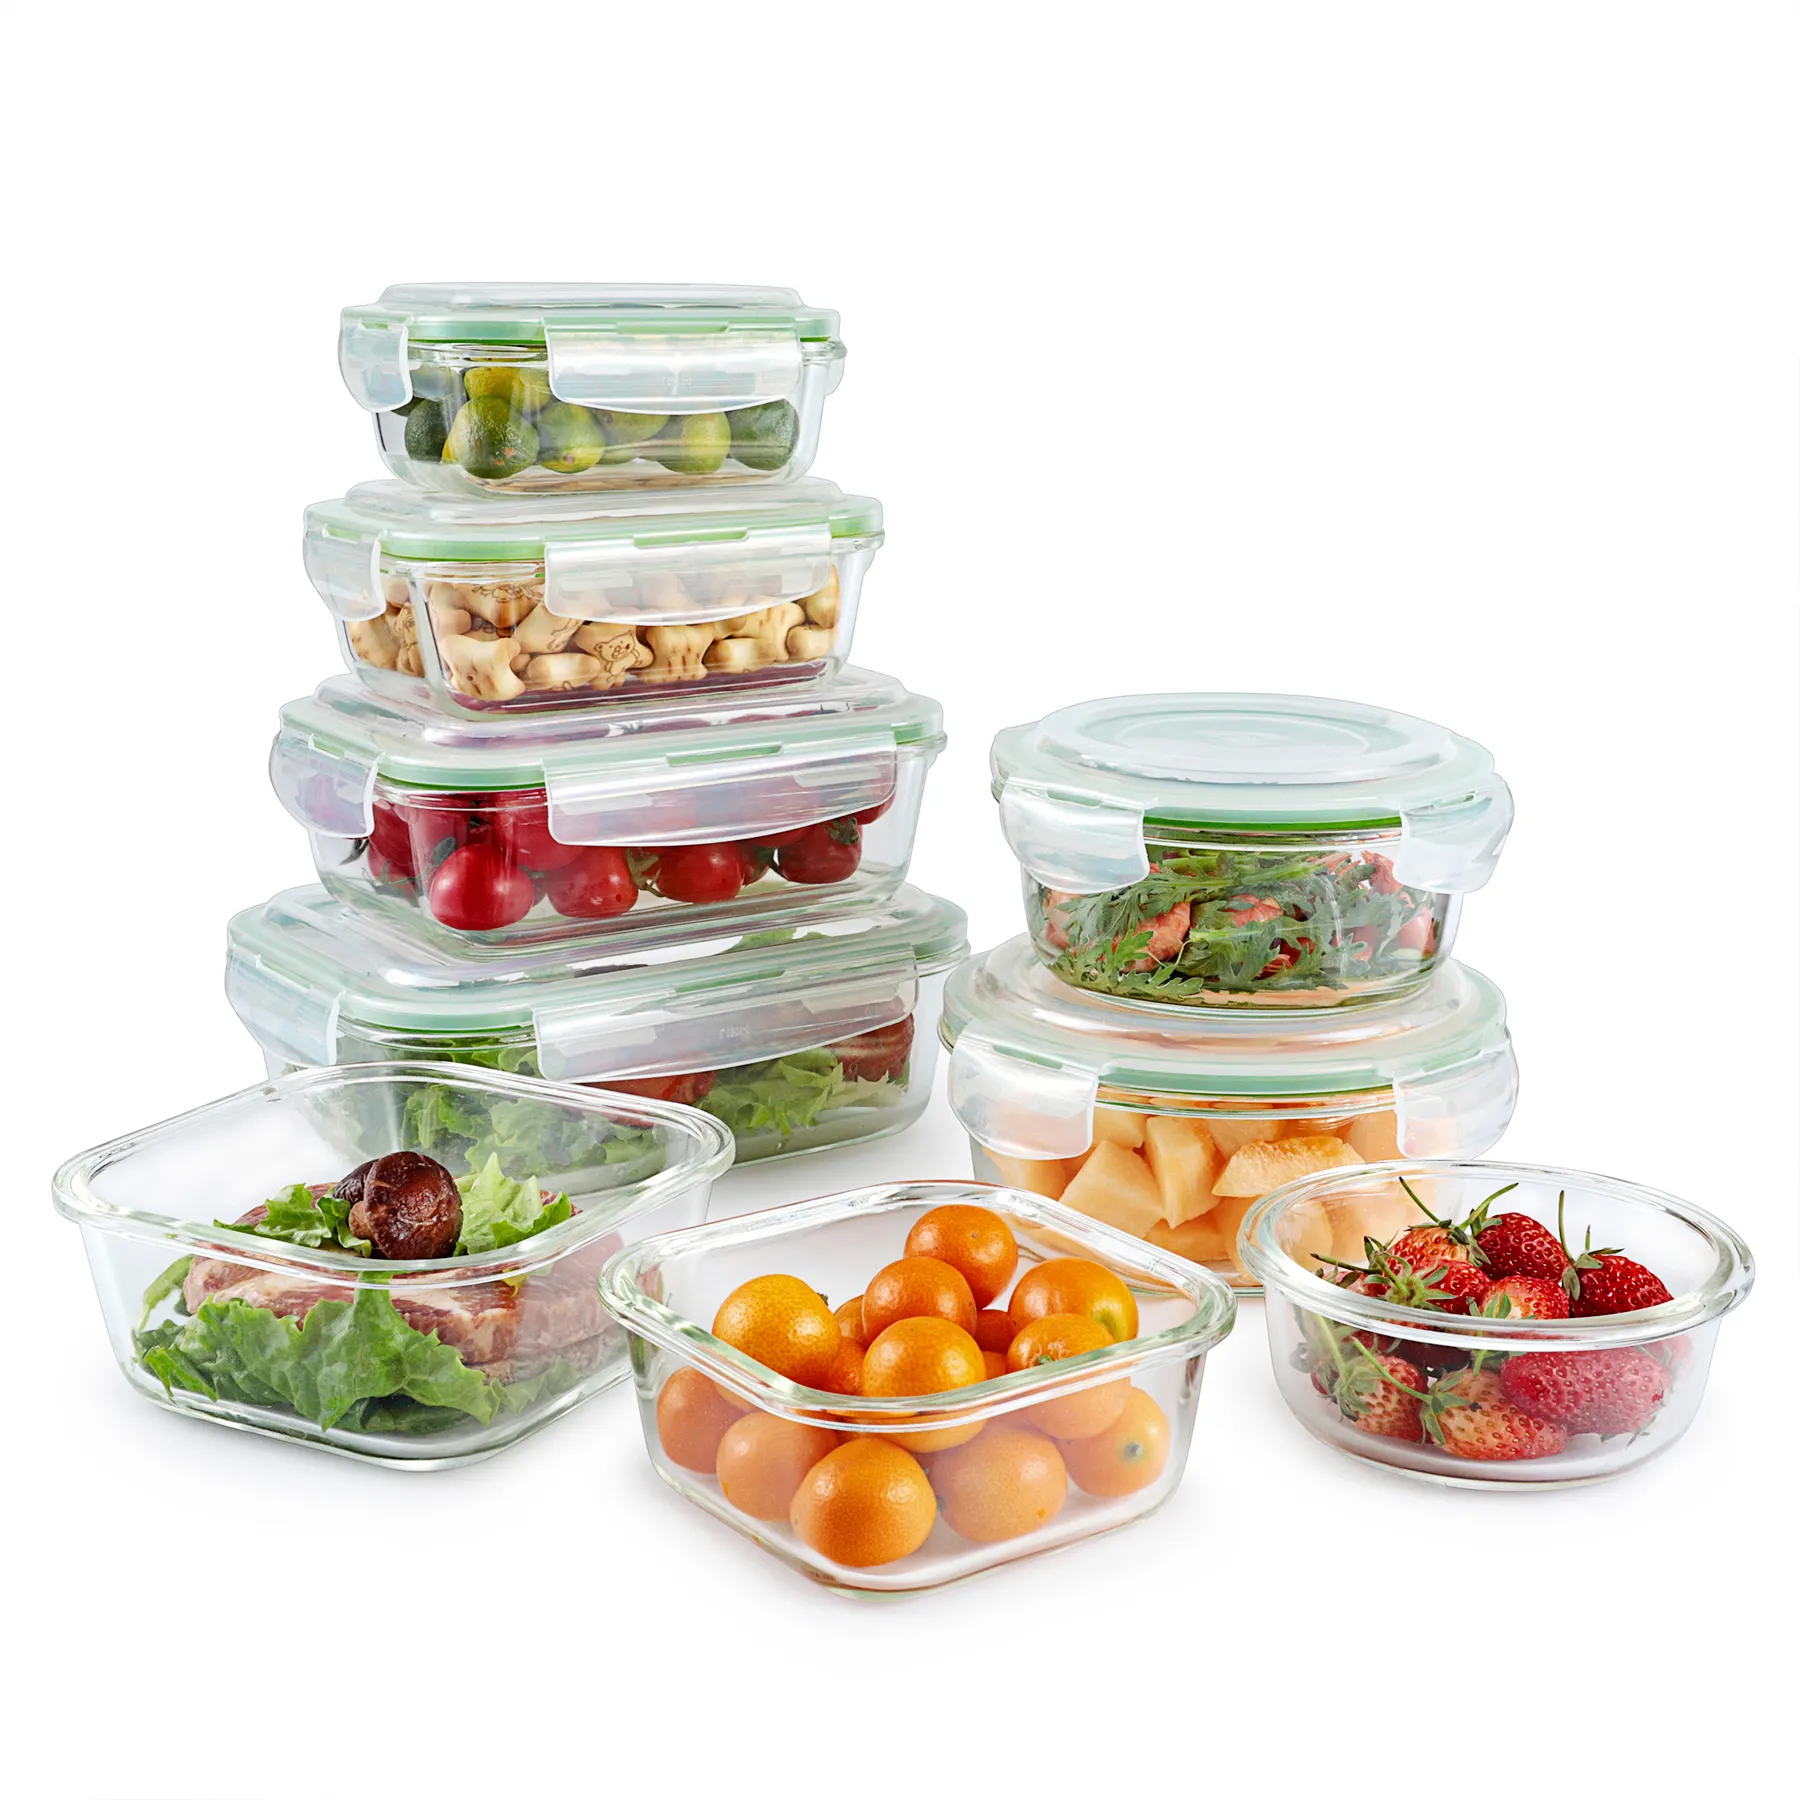 Home Storage Organization 12 pcs glass food container set with plastic lid